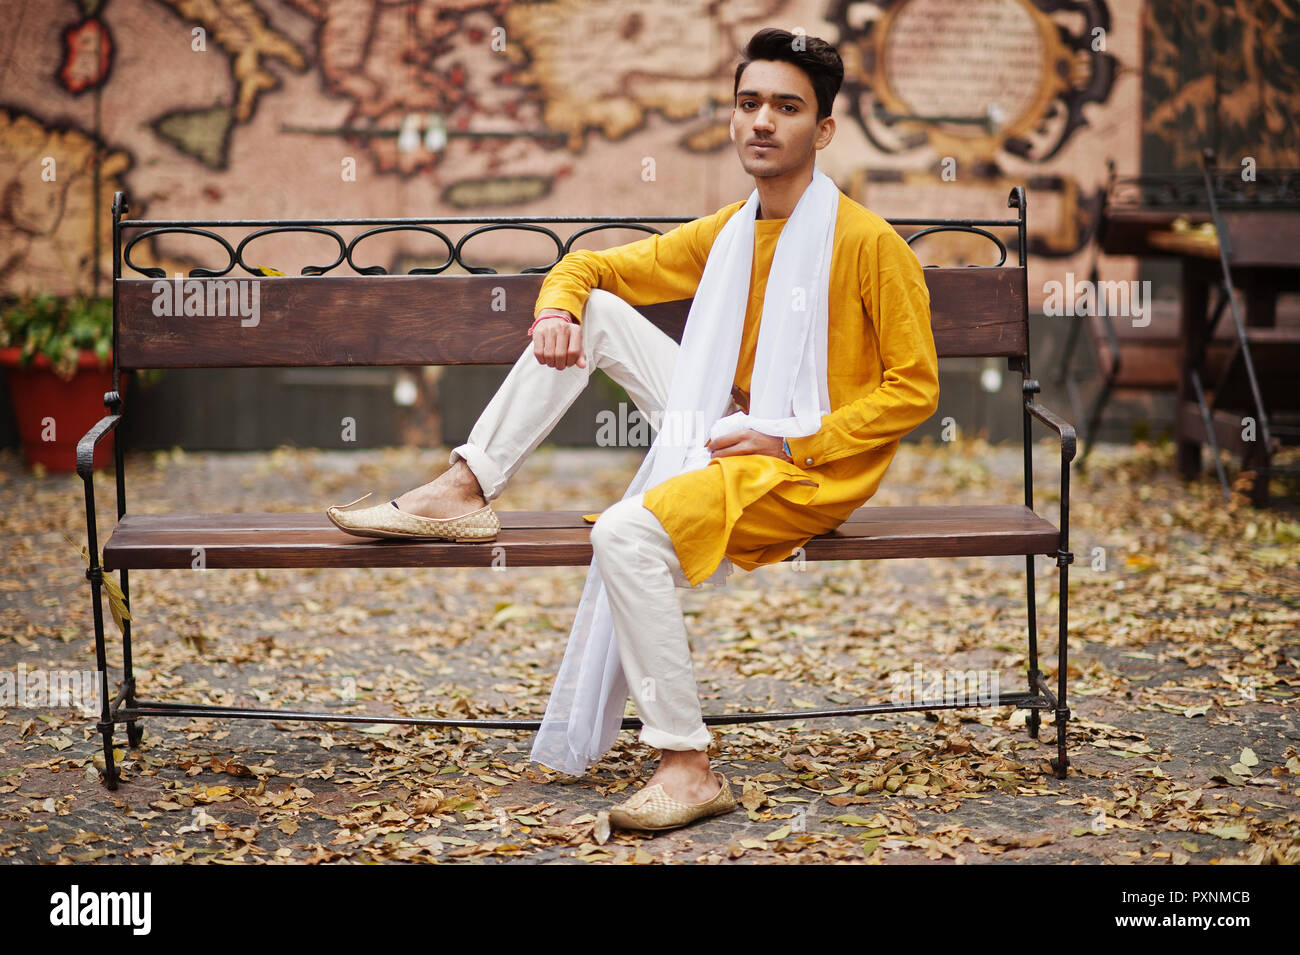 Image of Indian Man Wearing Traditional Wear and Posing-DN026717-Picxy